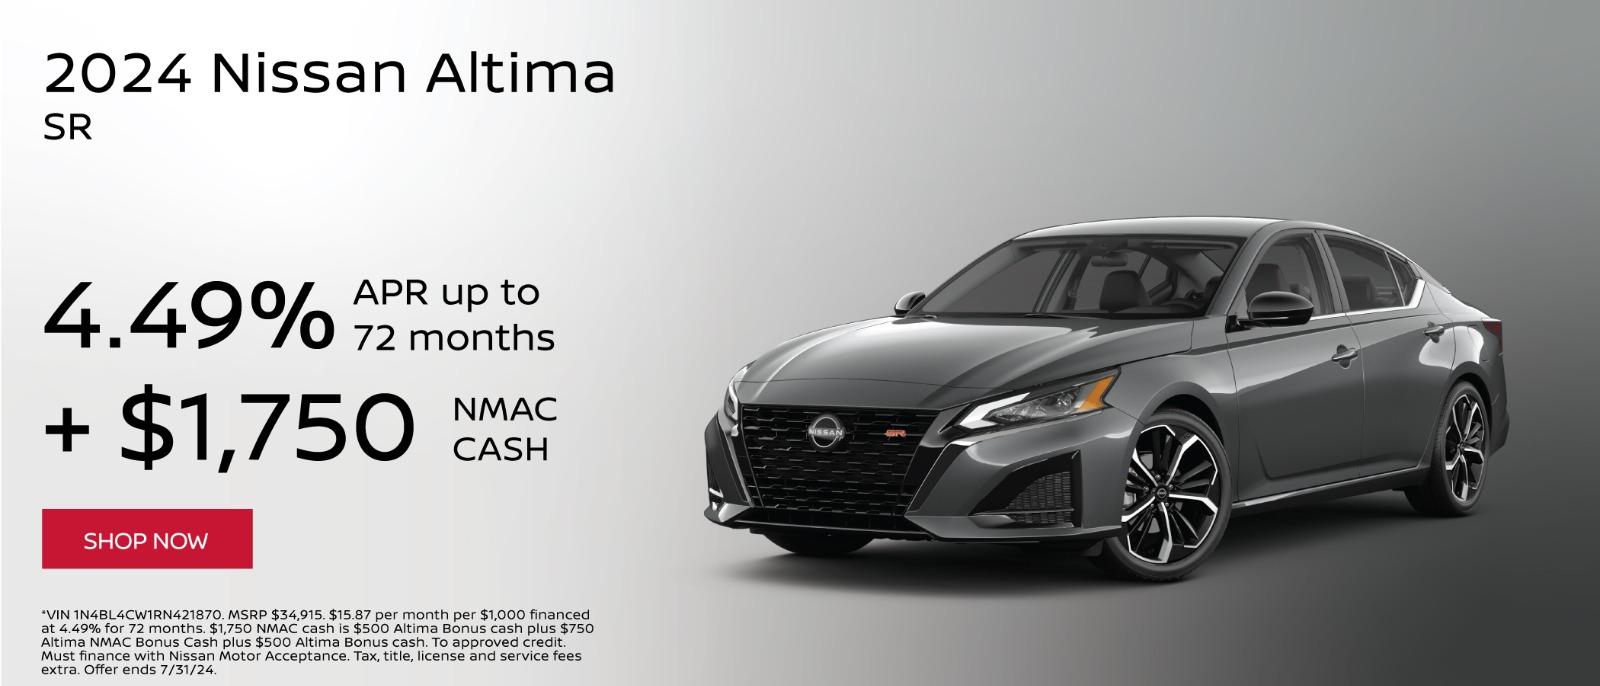 All New 2024 Nissan Altima 4.49%APR for 72 months